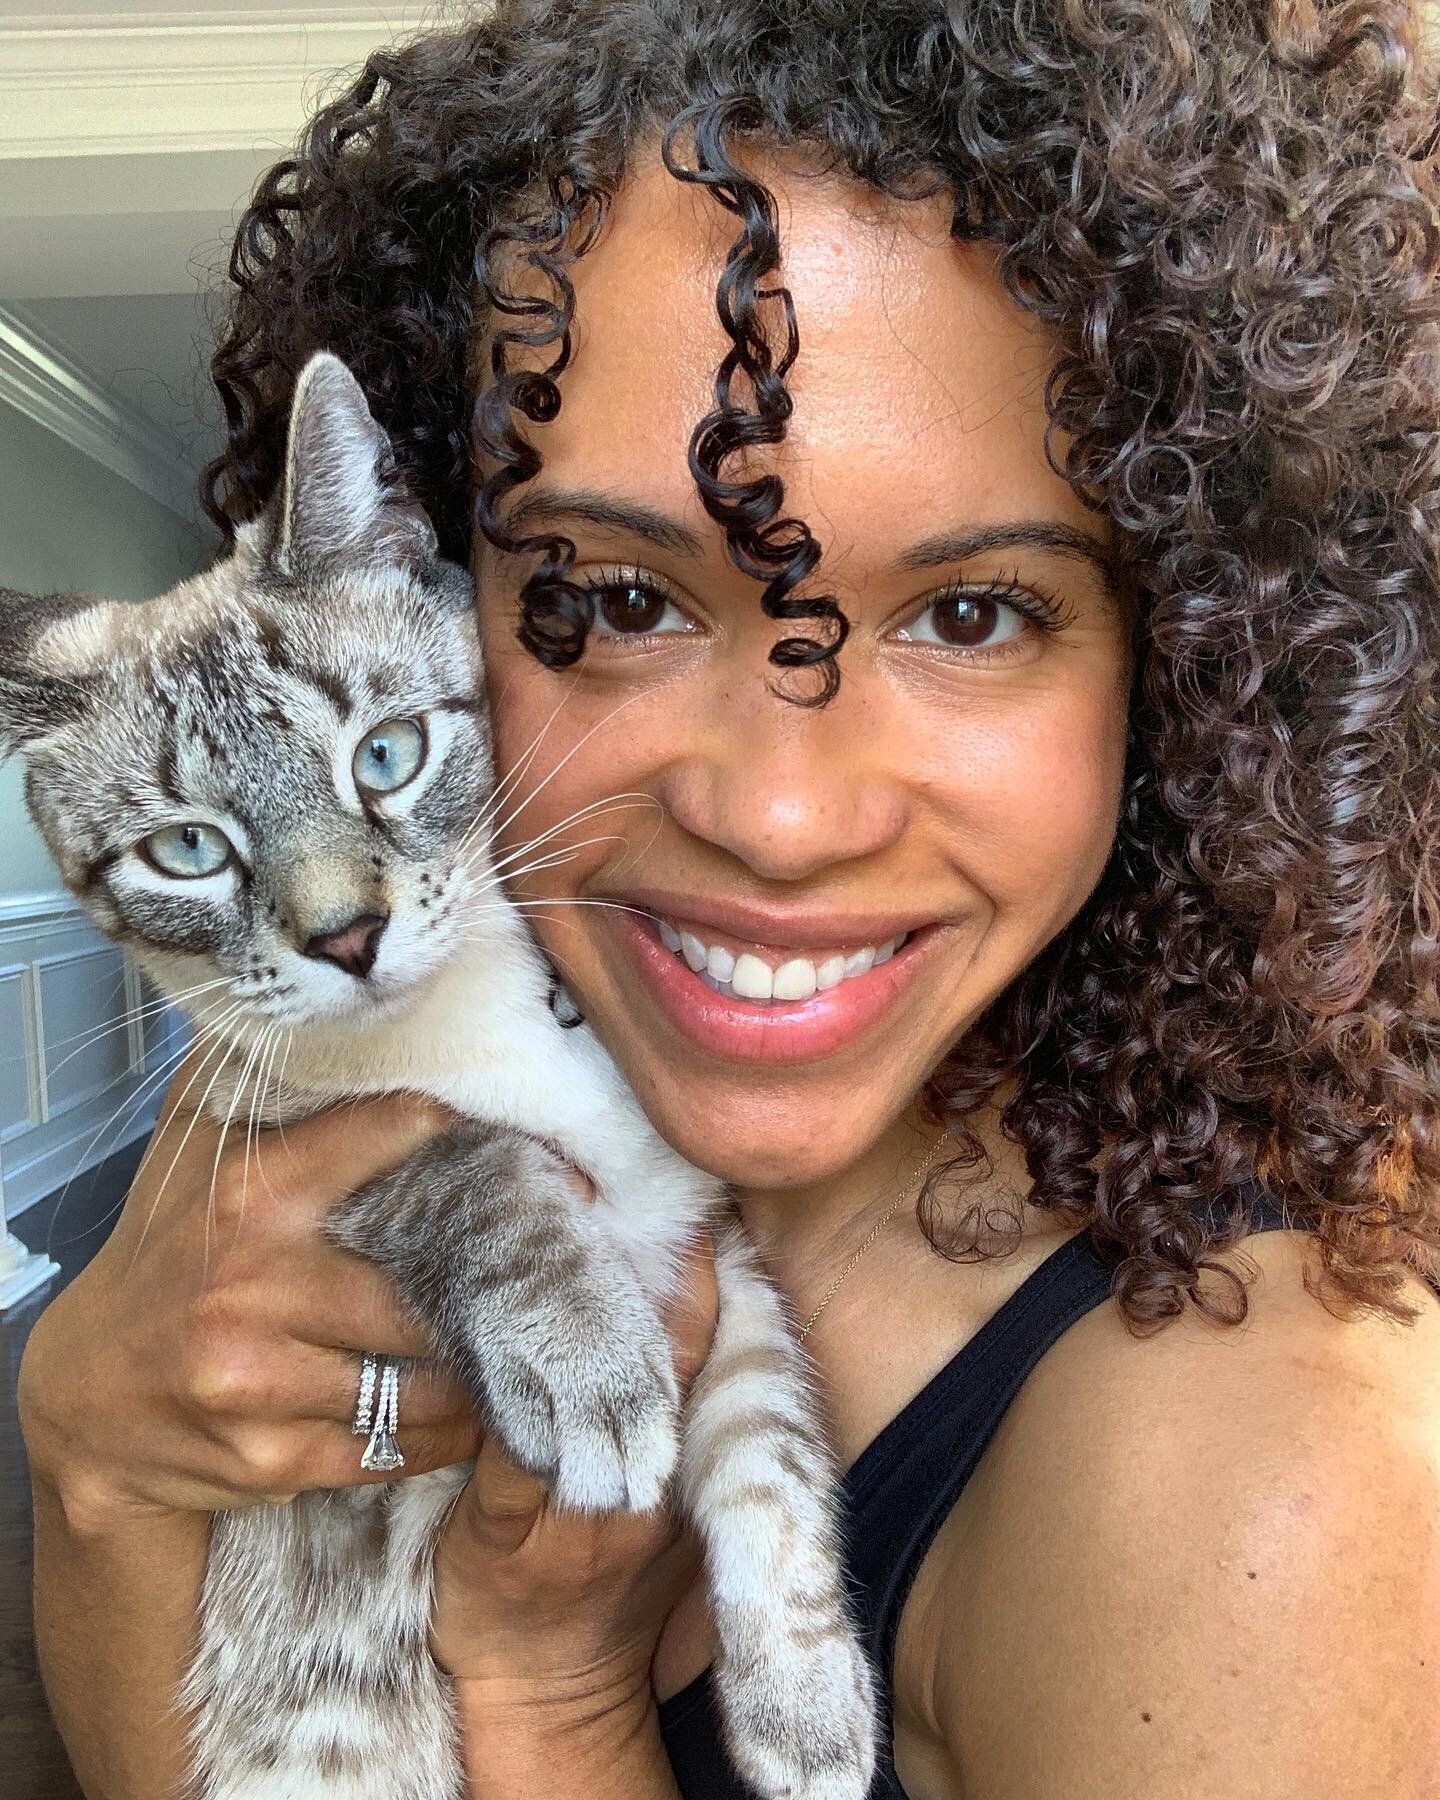 No filter. Just a happy girl and her mildly annoyed cat 🐈 😑 😆 ☀️
.
.
.
.
.
.
#cat #catsofinstagram #catlife #catlifeishard #annoyedcat #kitten #kittensofinstagram #kittenlove #kittenselfie #catstagram #cats #catlovers #curlyhair #curly #curlygirl 